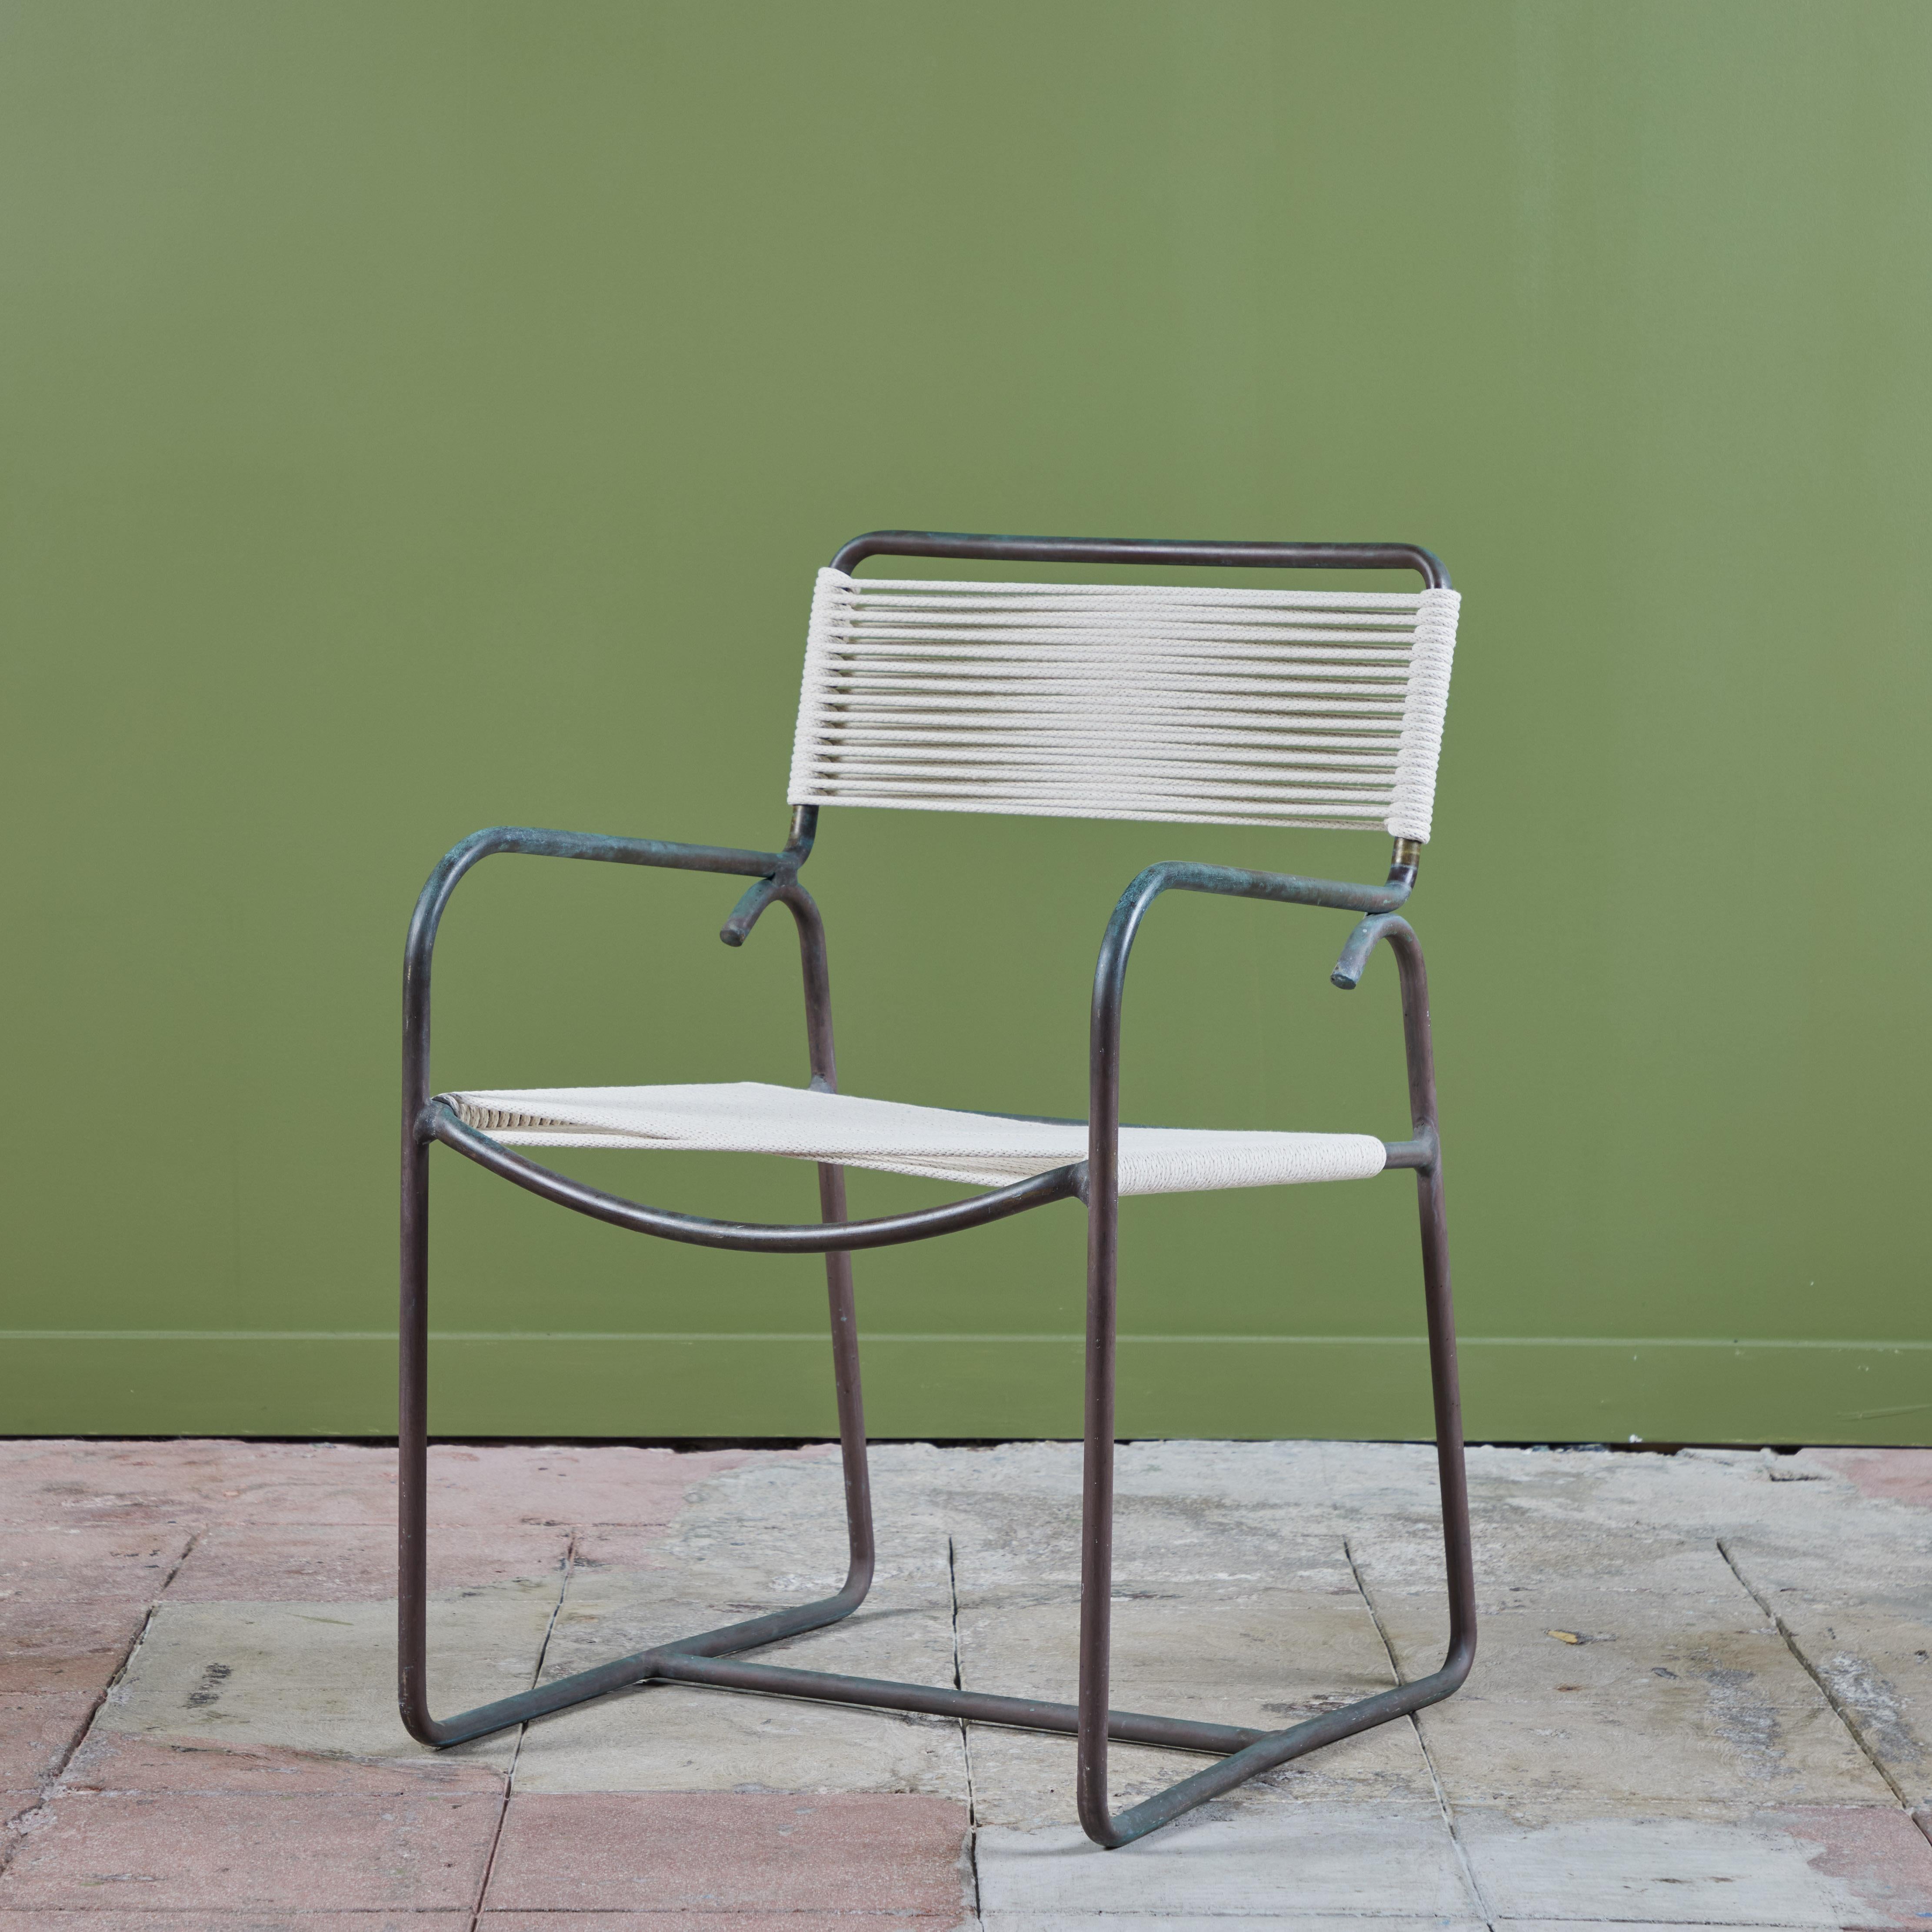 A model C1700A patio armchair in patinated bronze, designed by Walter Lamb and produced by Brown Jordan. The chair has a tubular frame supported by a bent bronze runner and arm on each side. The seat and backrest have been re-strung with a cotton